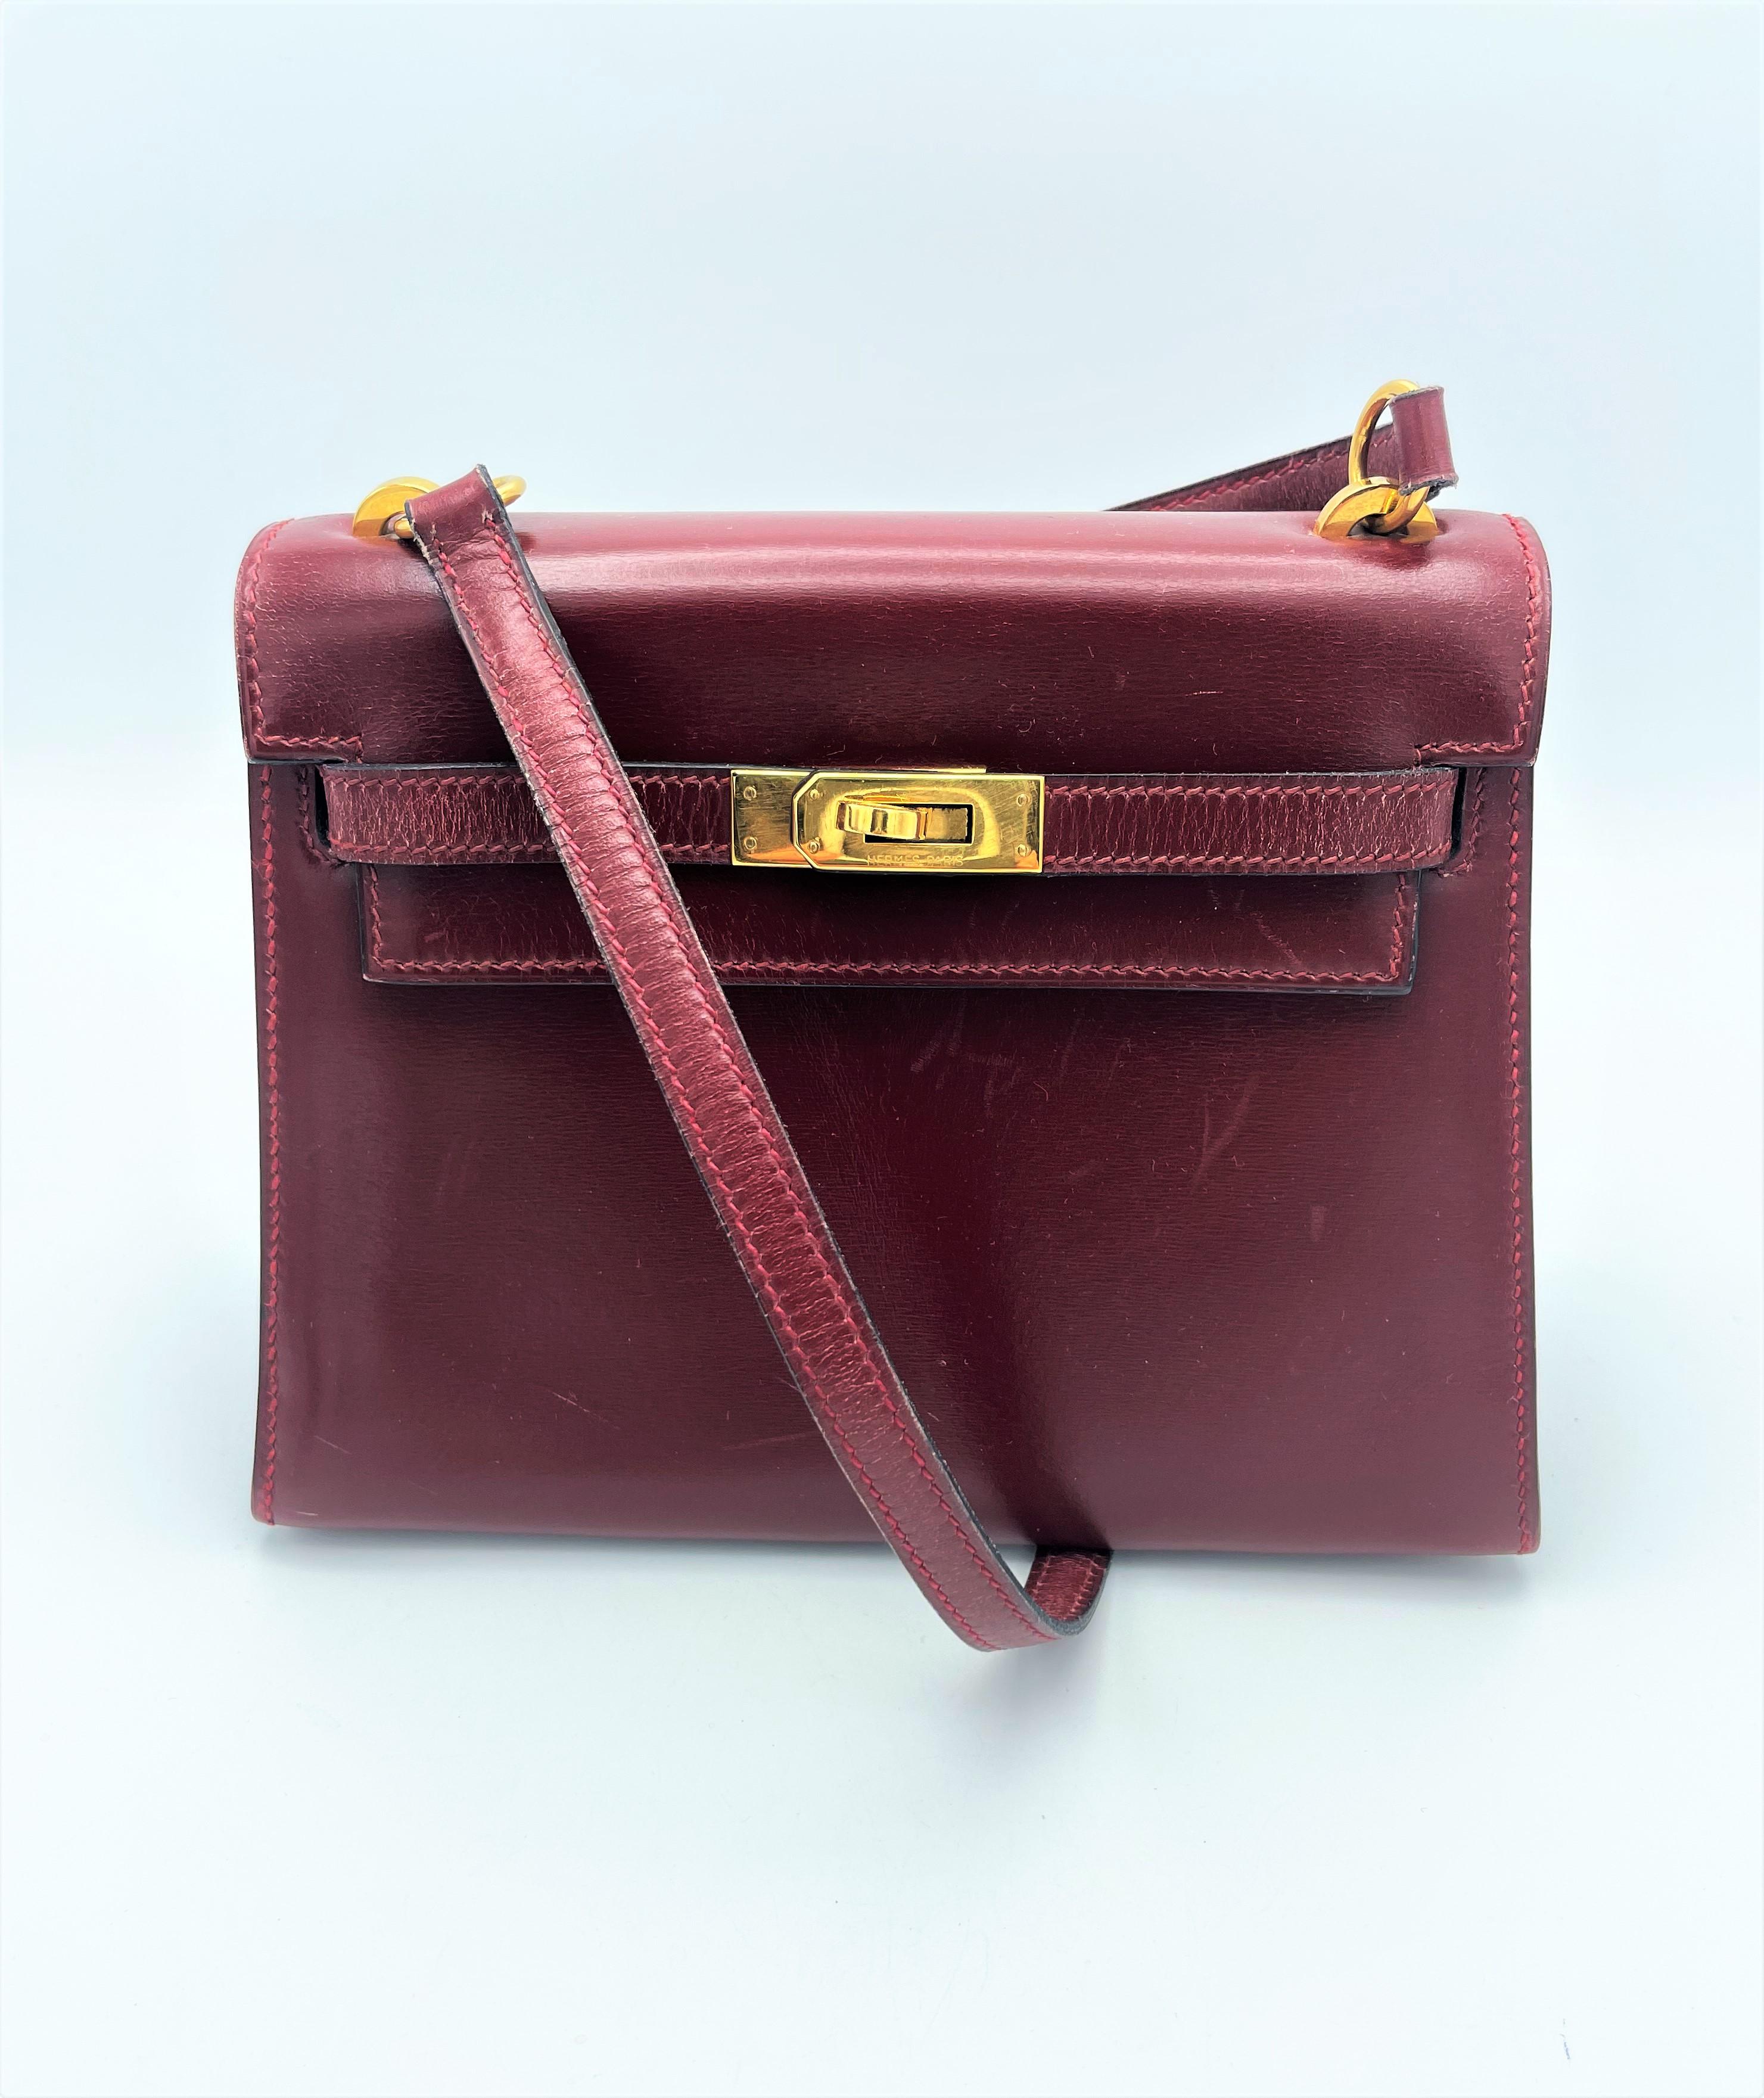 About
Very beautiful Mini Hermès Sellier shoulder bag, bordeaux , Box calf, M in circle - 1983
Features:
- Inside Pocket 1
- Size 